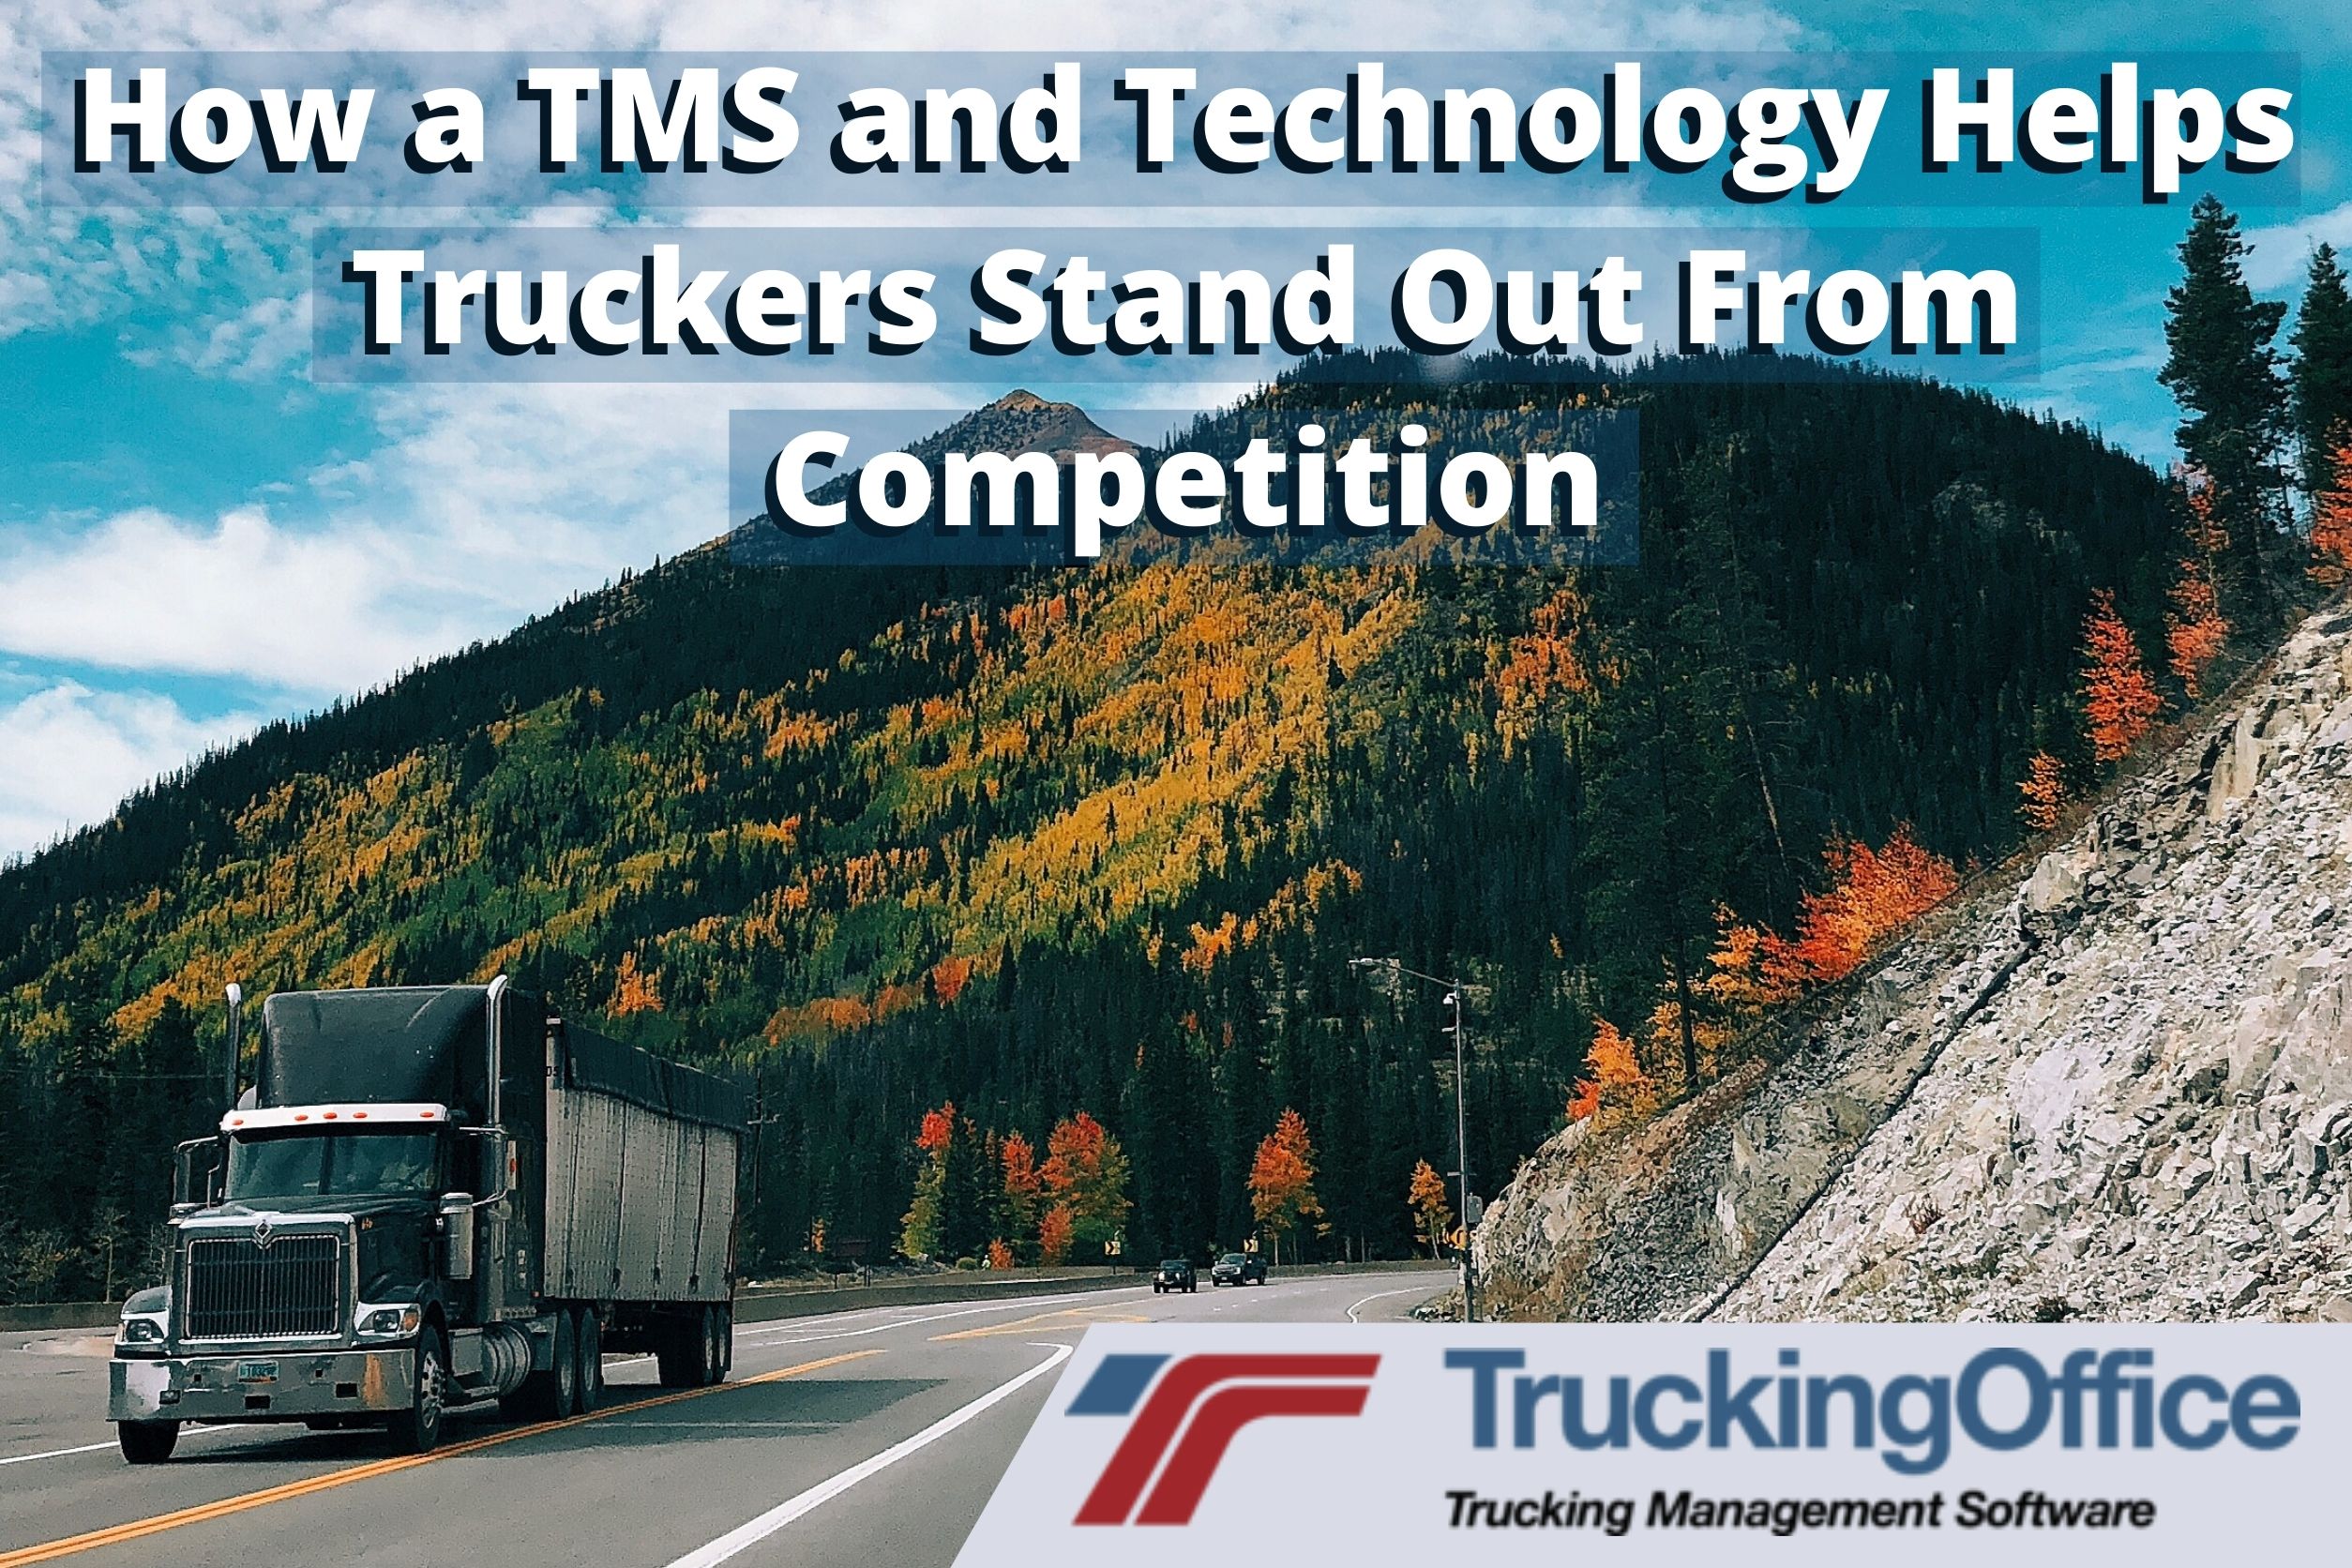 5 Ways a TMS and Technology Helps Truckers Stand Out From Competition